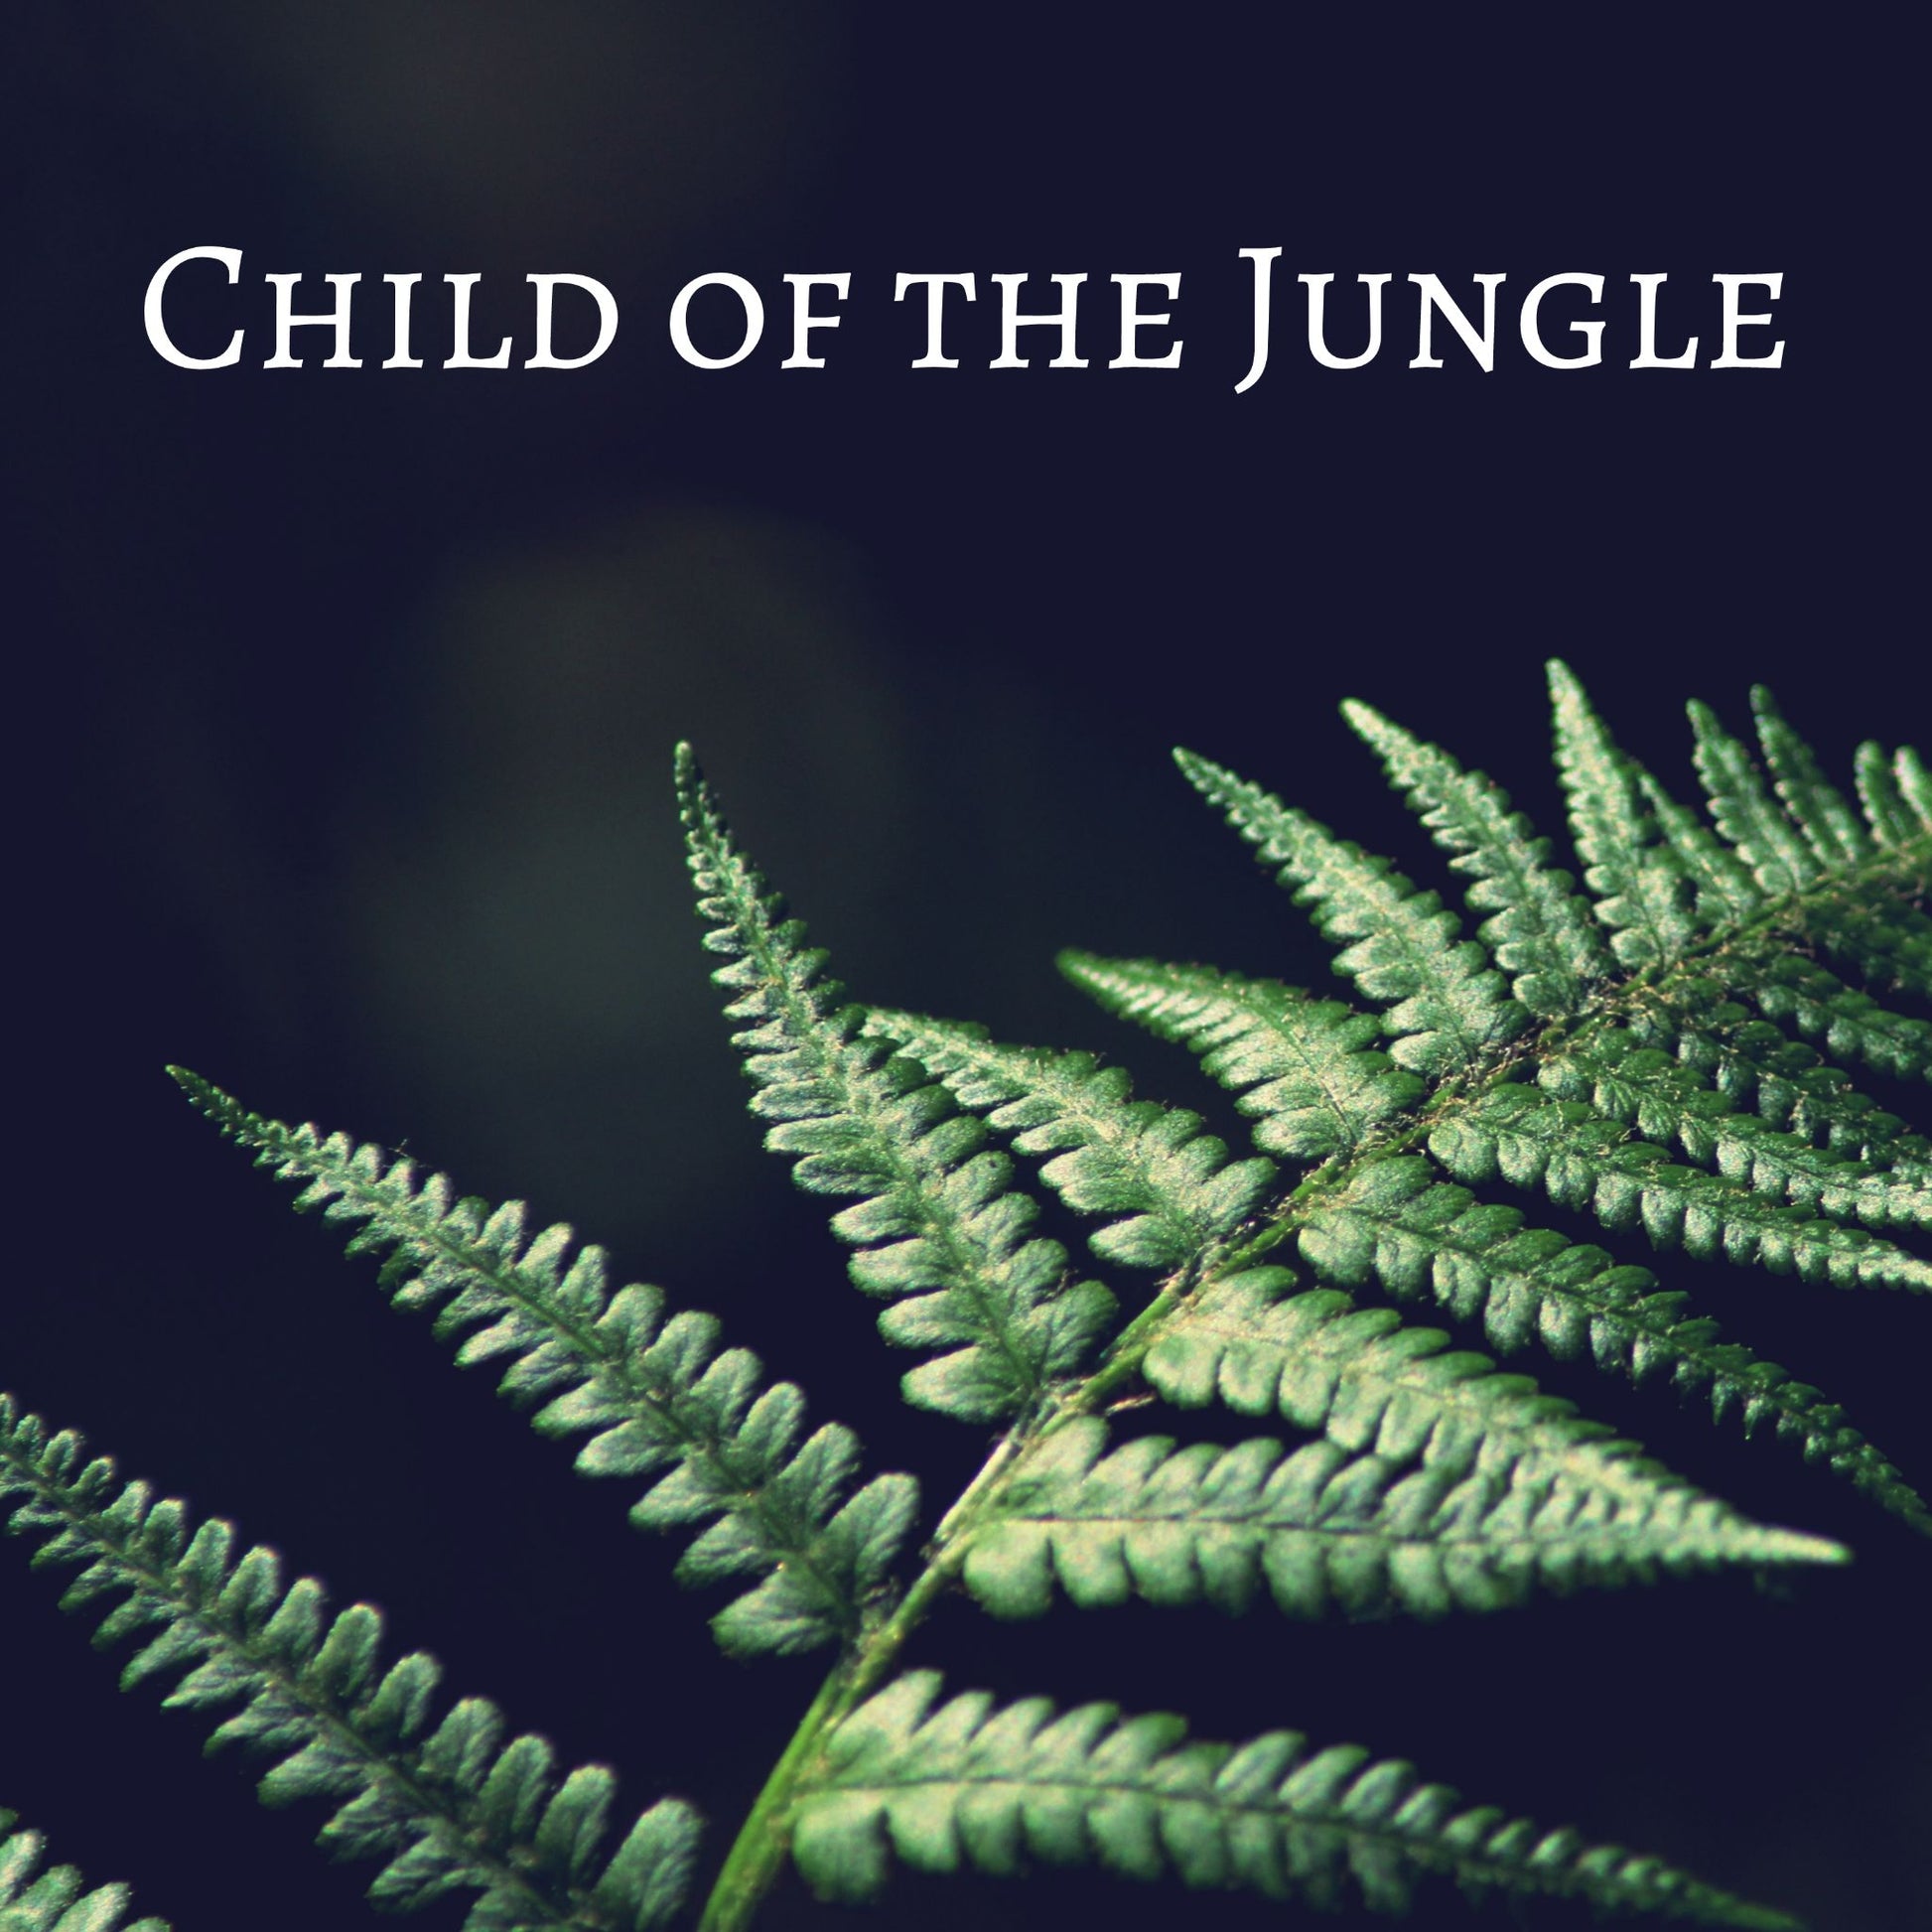 CD Cover of song Child of the Jungle